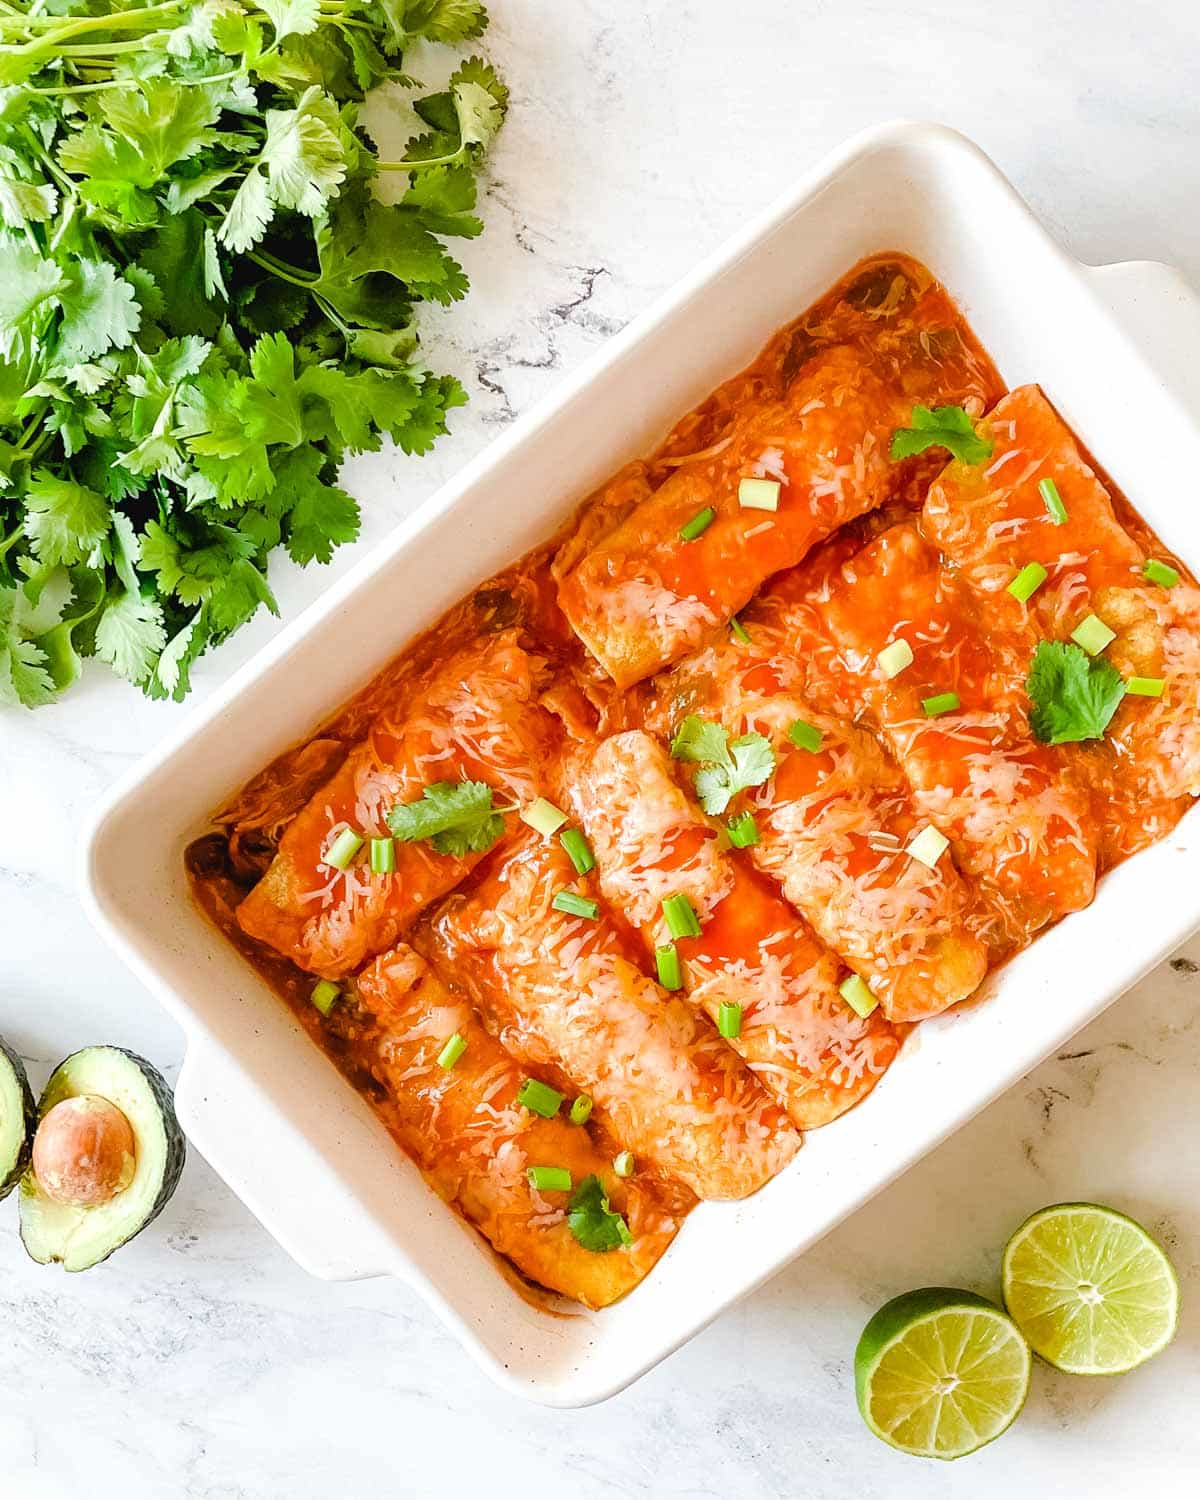 A baking dish full of chicken enchiladas is surrounded by cut limes, a halved avocado, and cilantro.